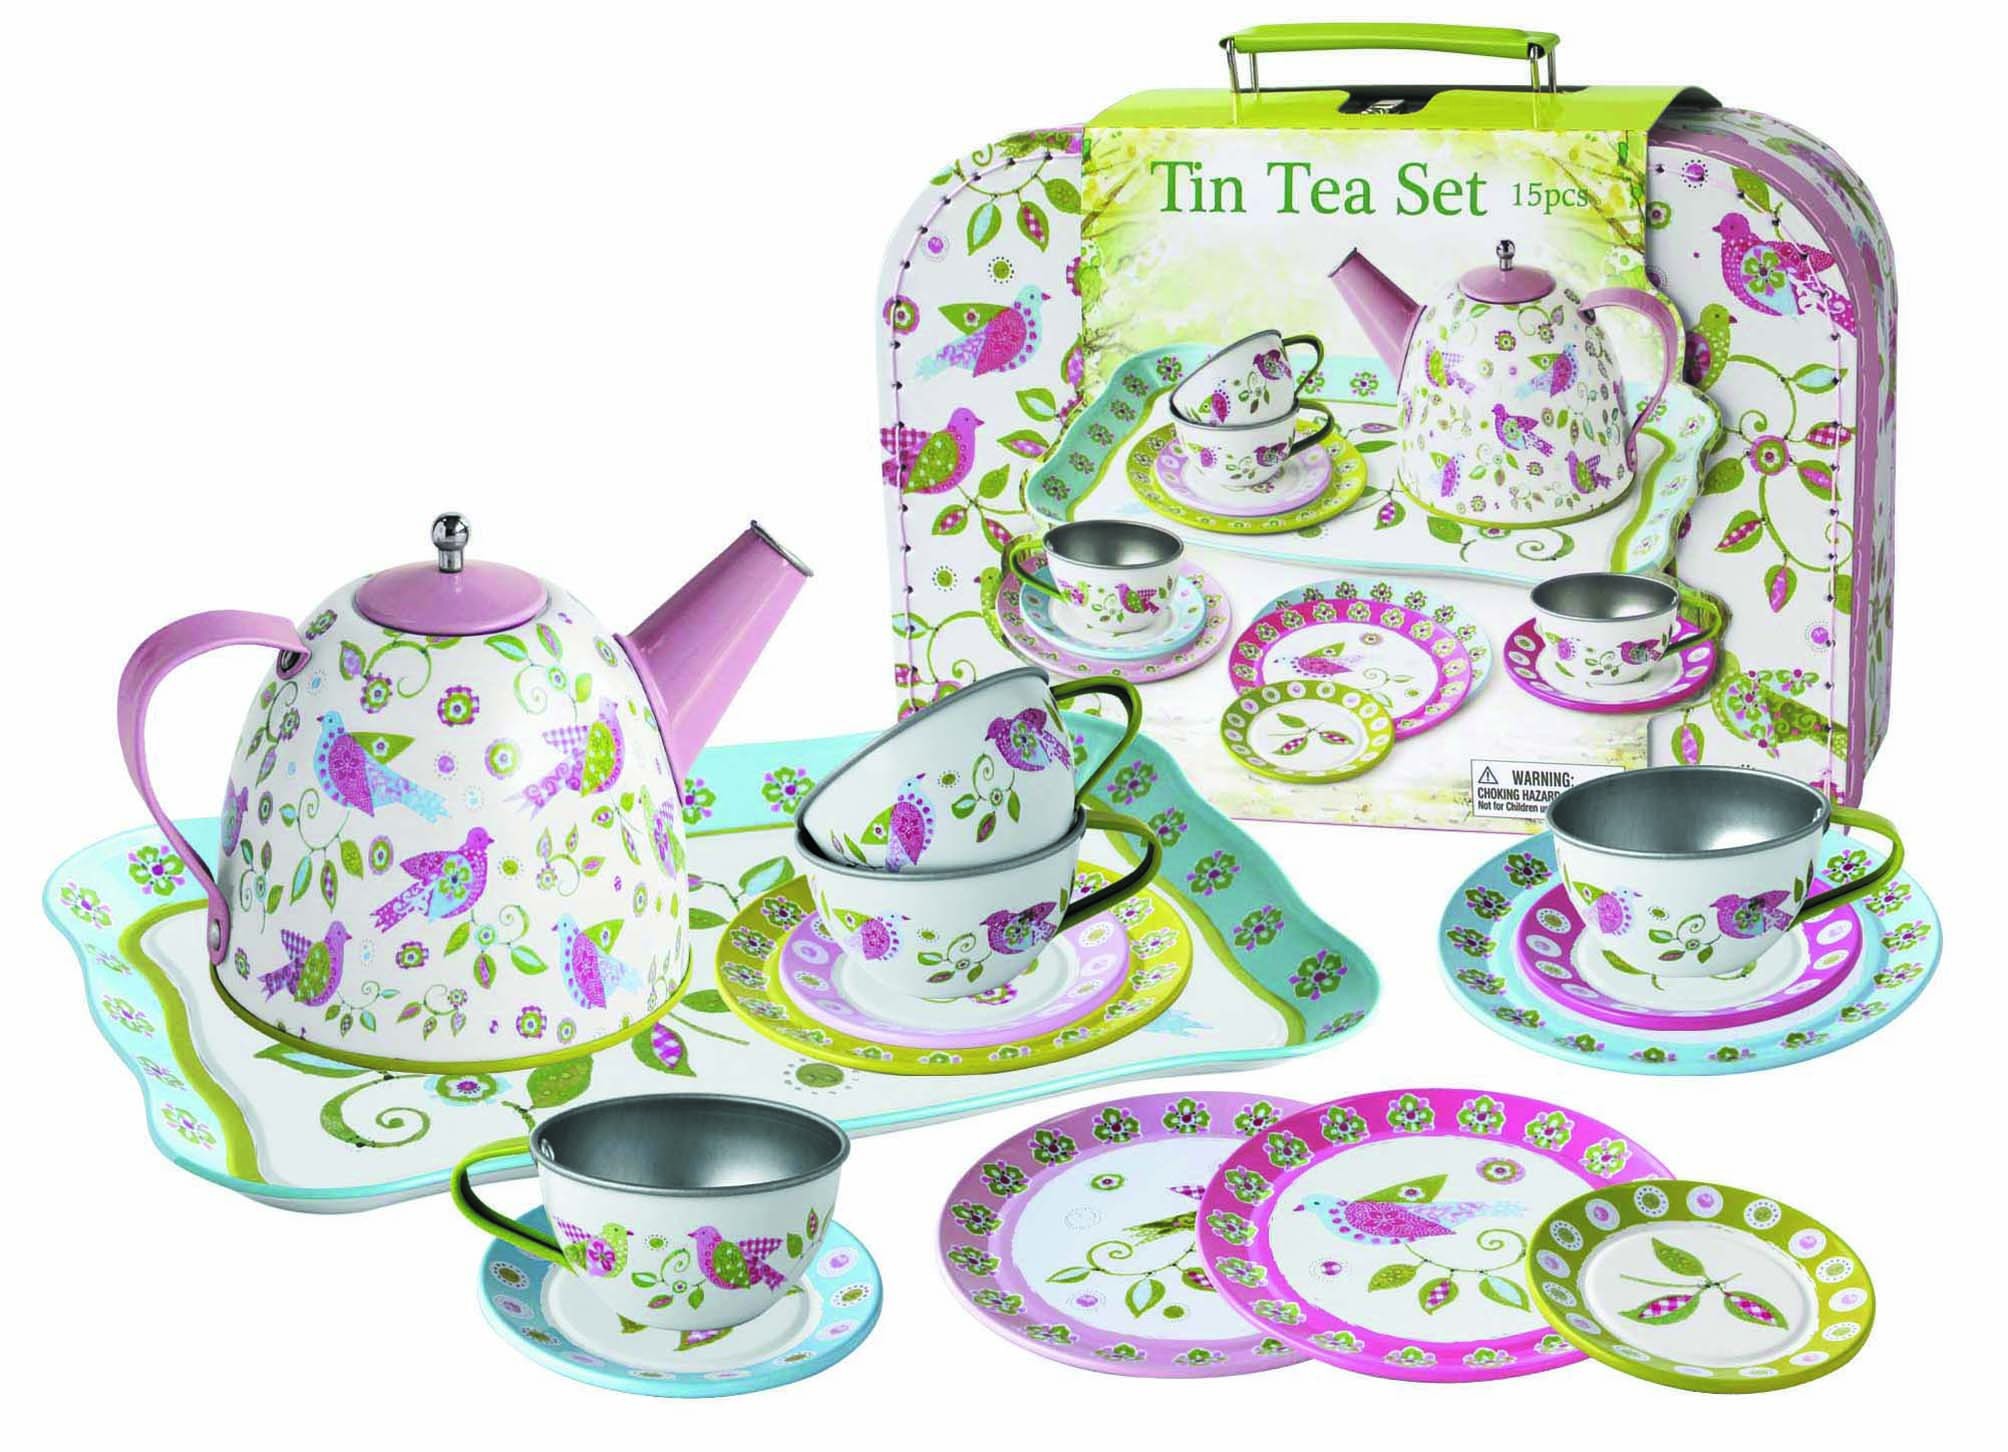 have a toddler play with a tea set